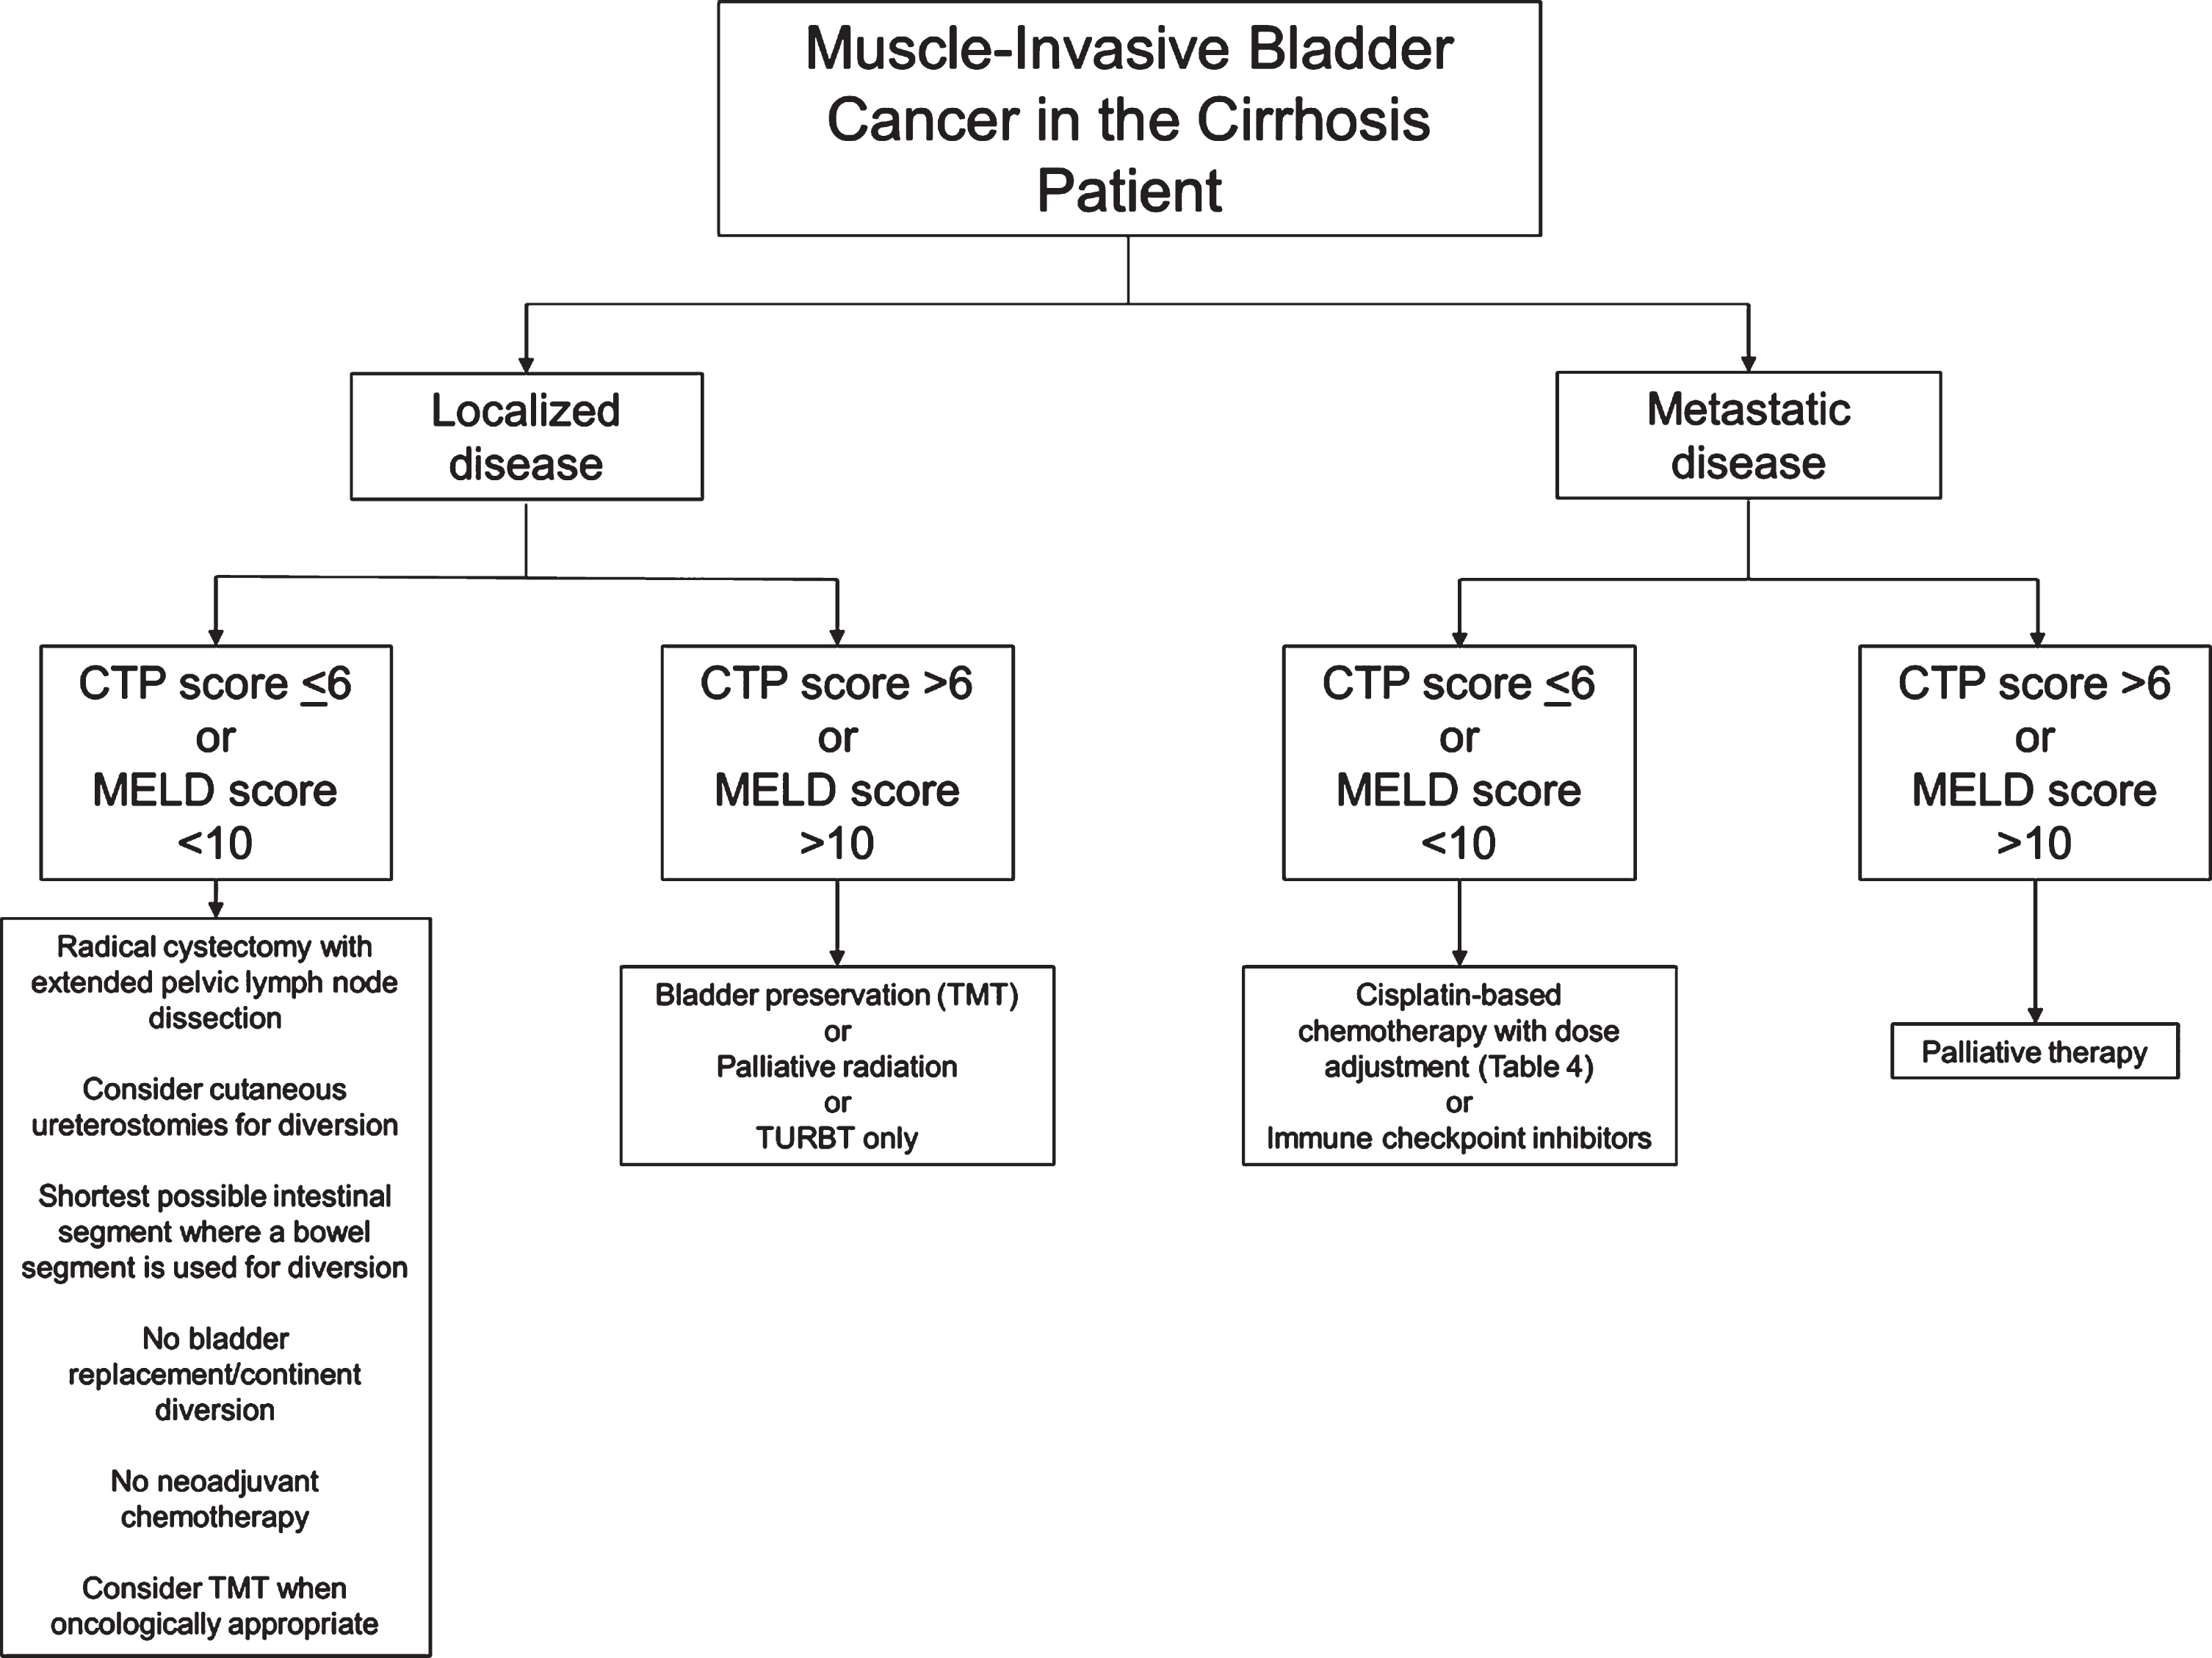 Flow chart of suggested considerations for patients with muscle-invasive bladder cancer and cirrhosis. Developed at McMaster University. CTP: Child-Pugh-Turcotte; MELD: Model for End-Stage Liver Disease; TMT: Trimodal therapy; TURBT: Transurethral resection of bladder tumour.